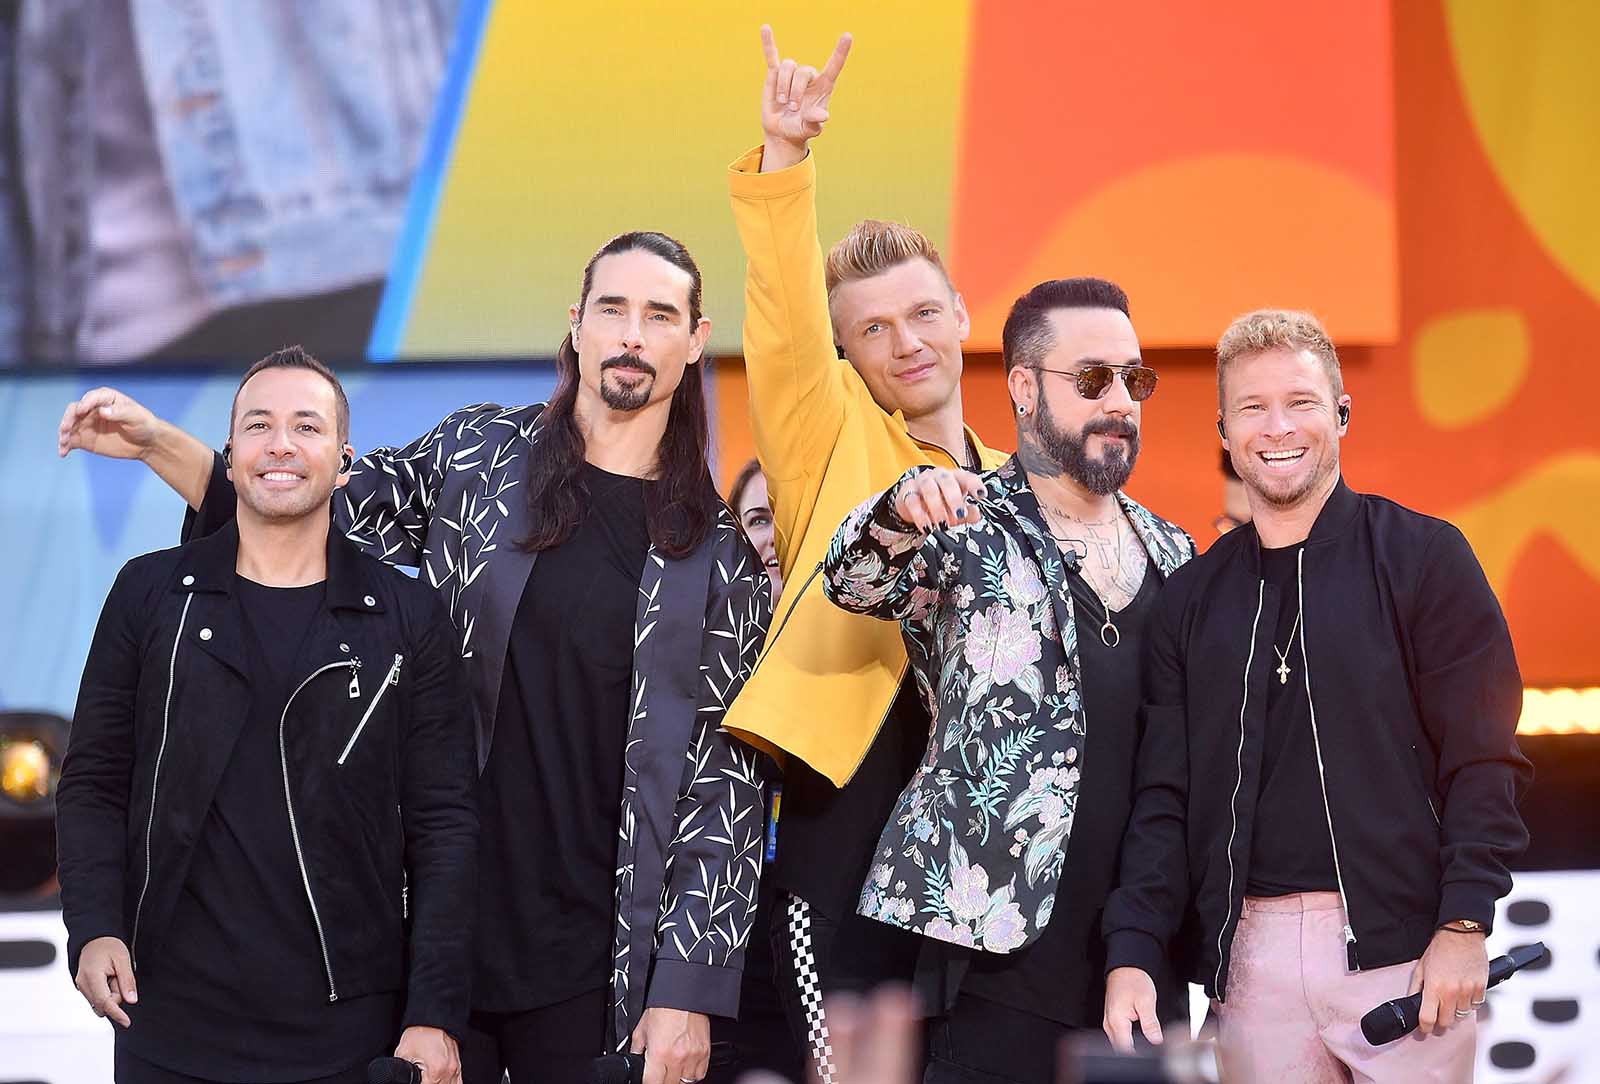 The Backstreet Boys members have been close for years, but it seems like that bond has been broken. Get the tea on the drama between the boy band members.